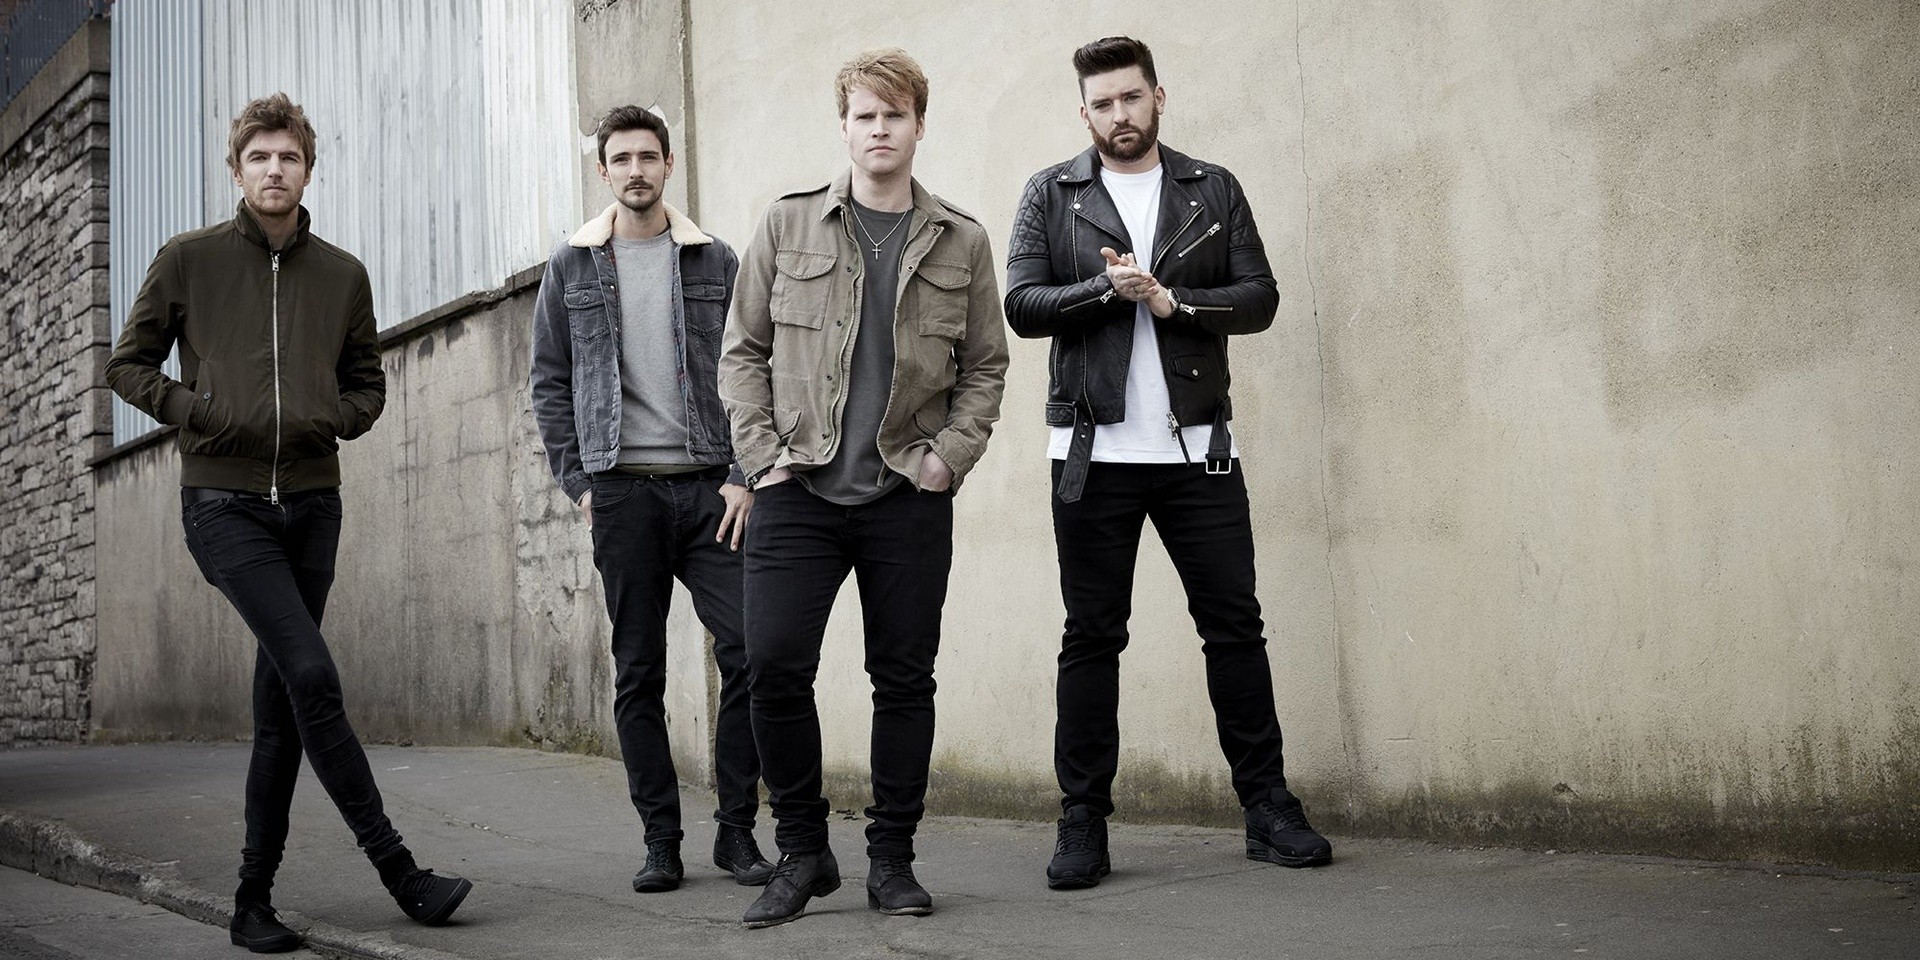 Kodaline's Jason Boland on the band's upcoming album, its Asian fan base, and more